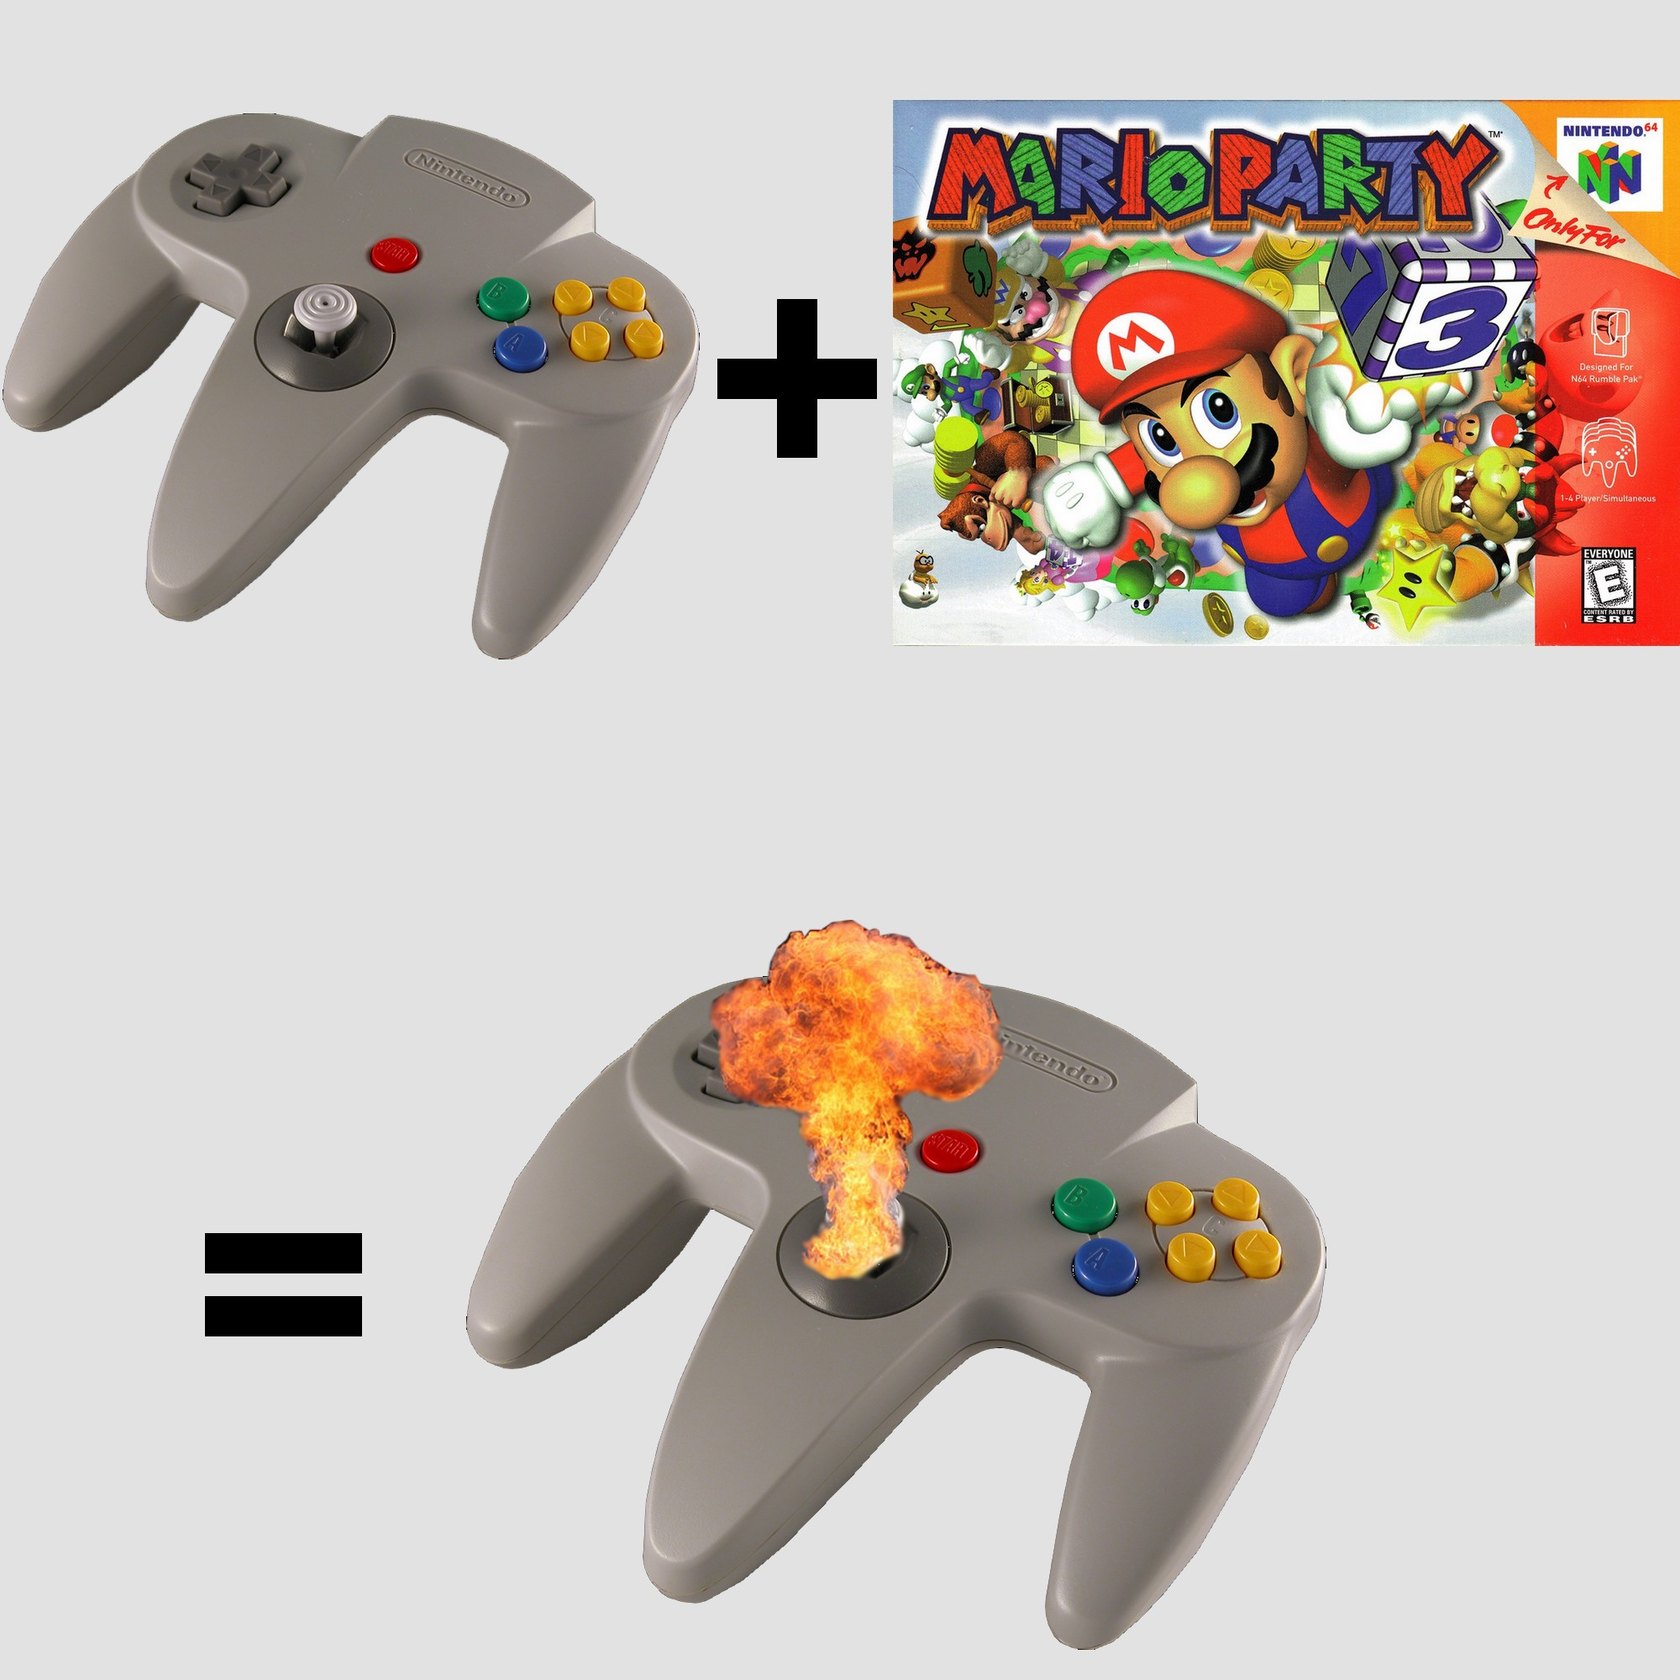 Mario Party was one of the hottest games back then - meme